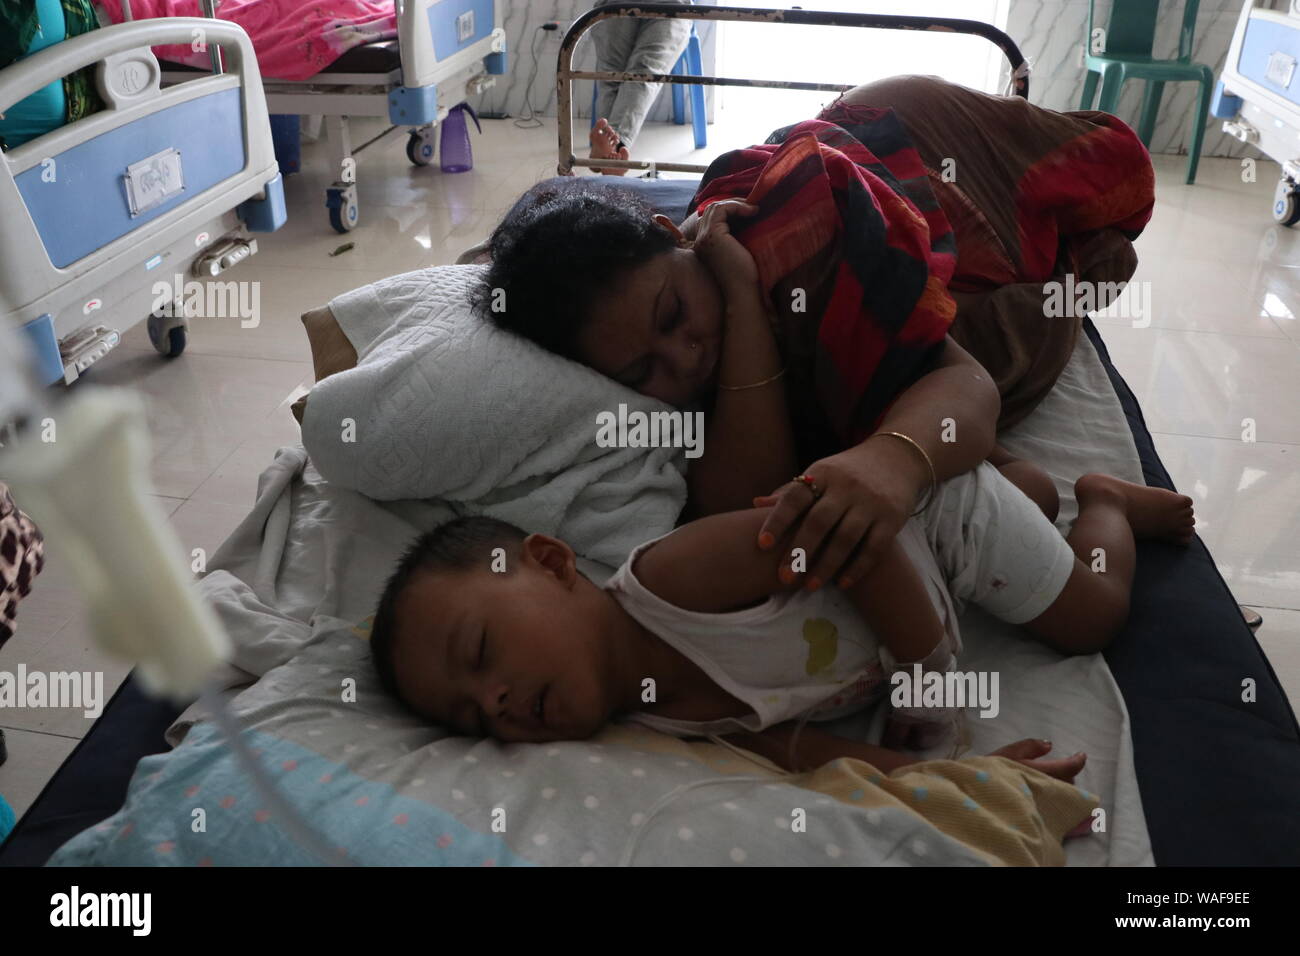 Dhaka, Bangladesh - August 24, 2019: The number of children suffering from dengue fever at the Holy family red crescent Hospital in Dhaka, Bangladesh. Stock Photo